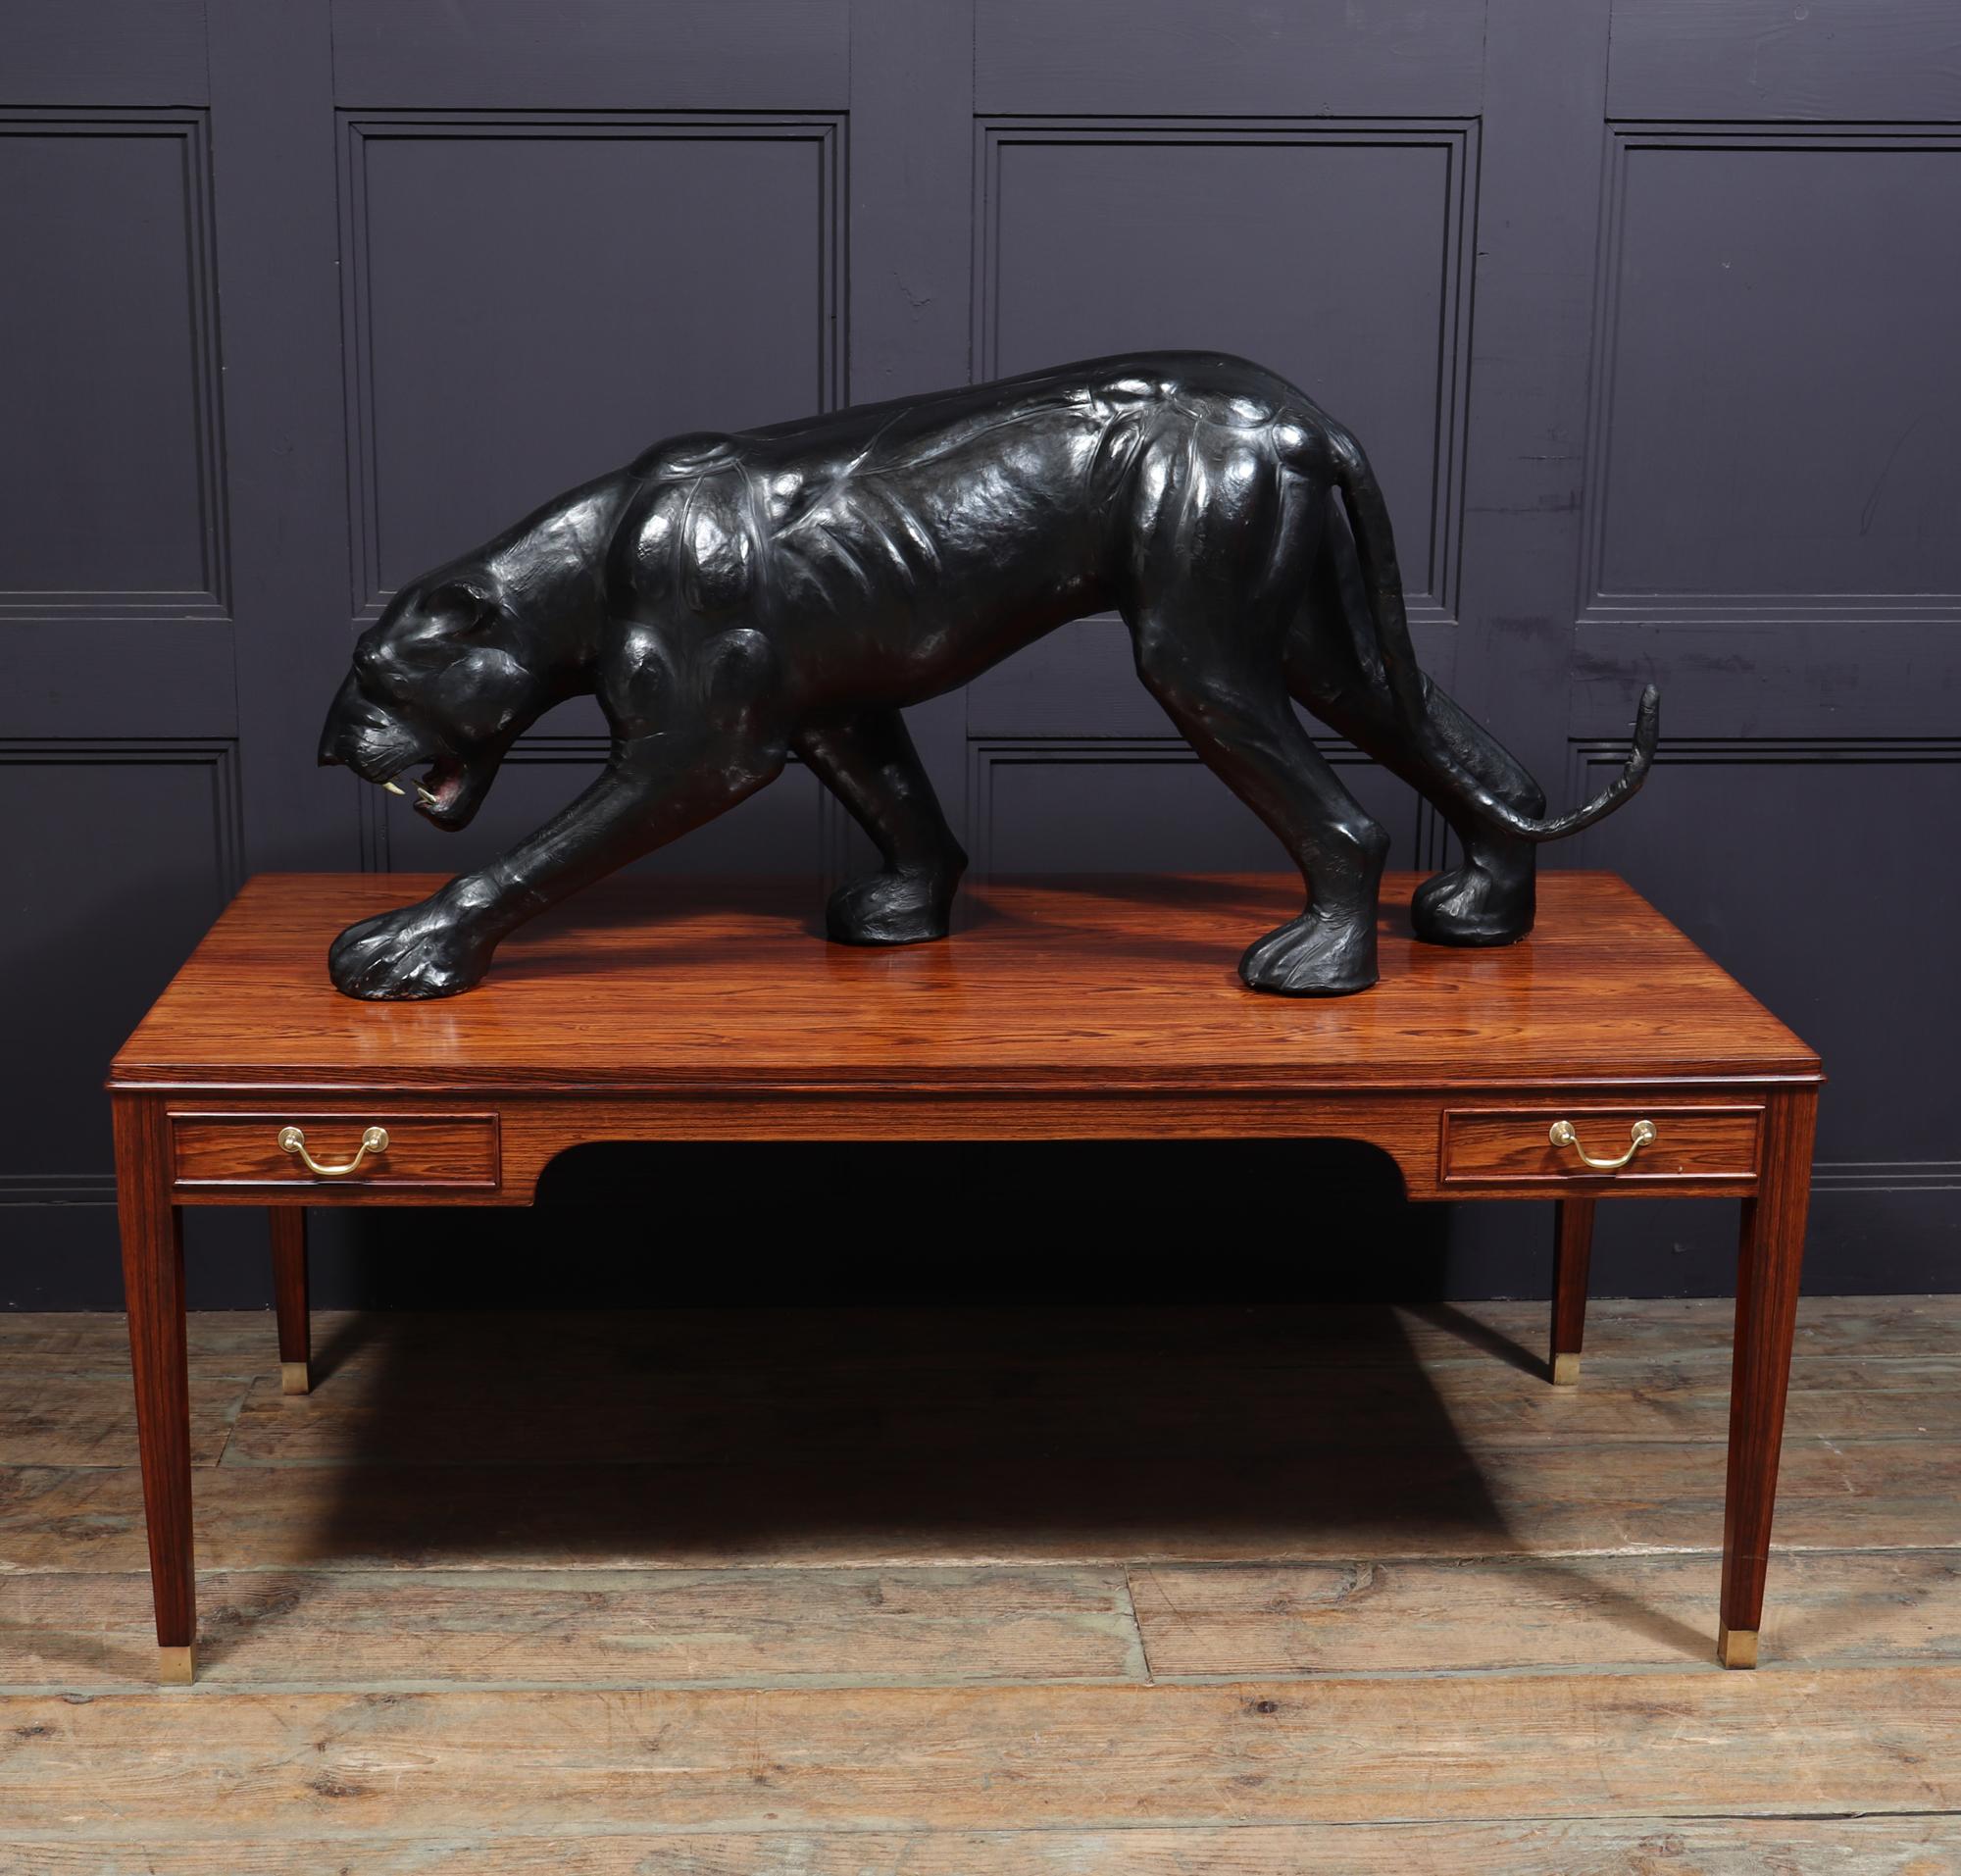 20th Century Large Leather Clad Panther Sculpture